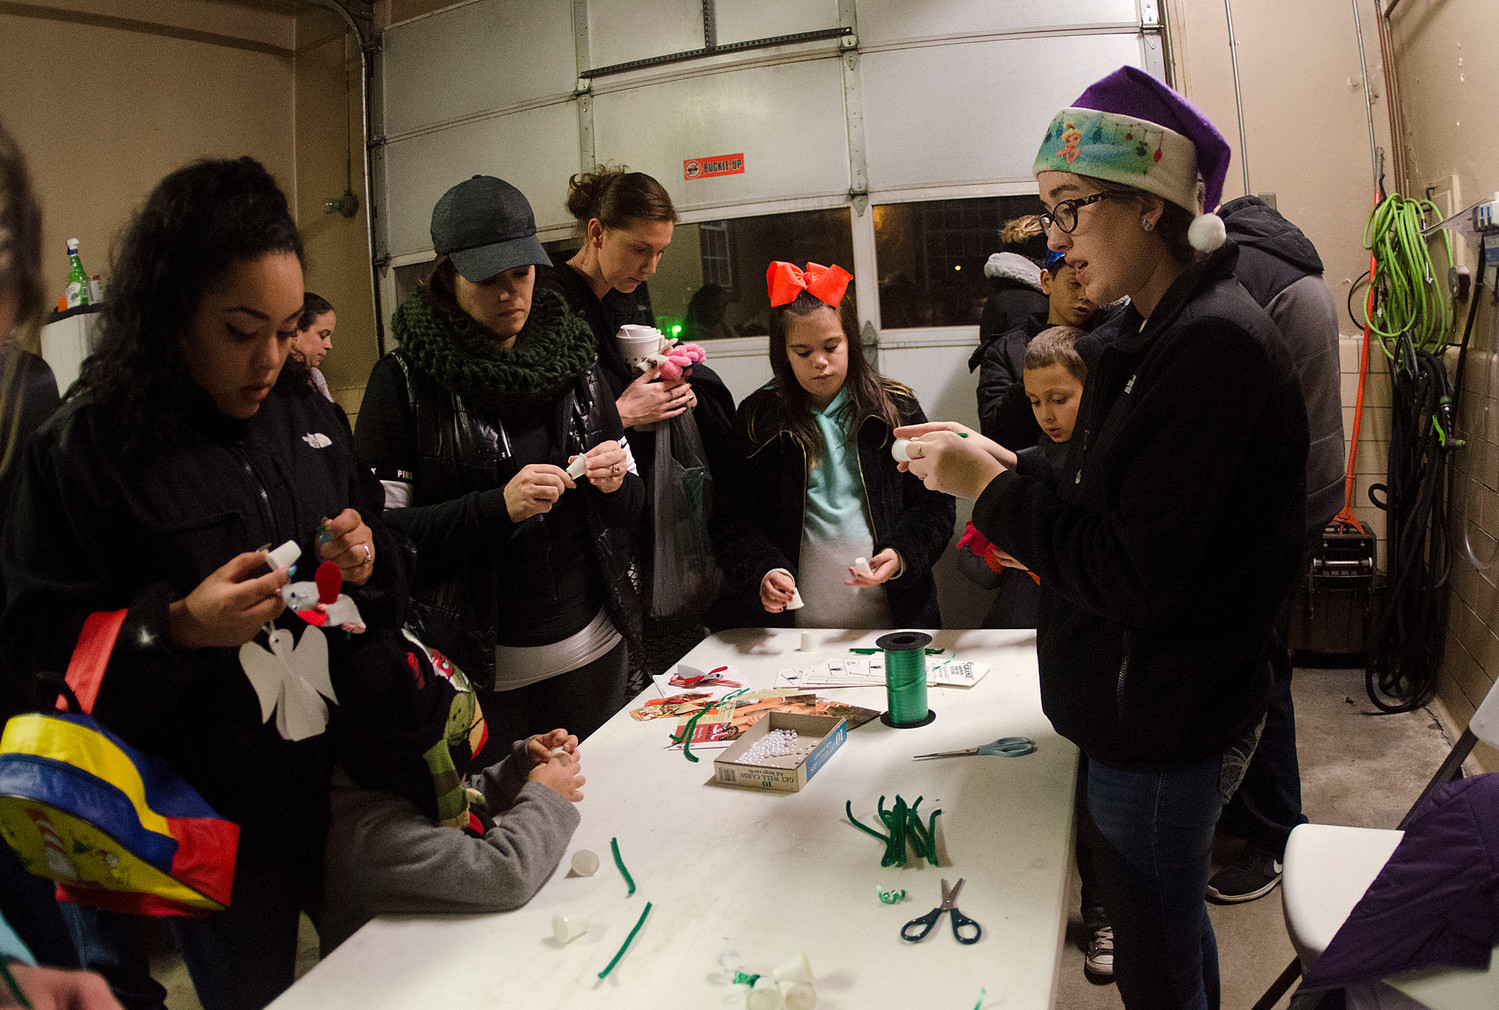 Grange member Lauren Kenyon (left) makes ornaments with the crowd at the Miller St. Rescue Station.